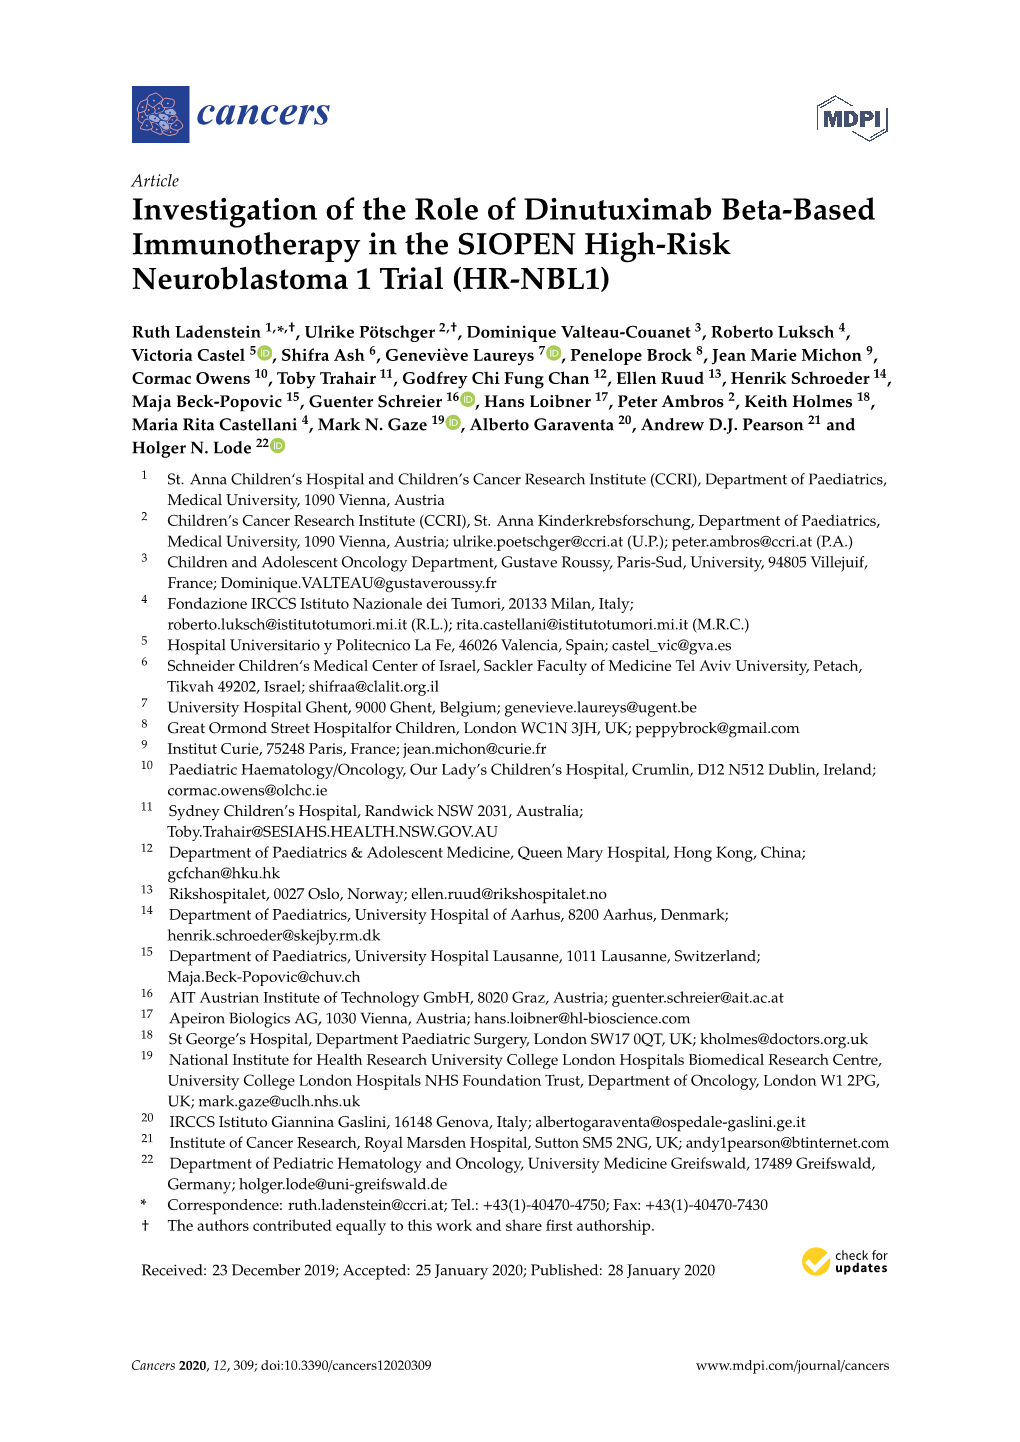 Investigation of the Role of Dinutuximab Beta-Based Immunotherapy in the SIOPEN High-Risk Neuroblastoma 1 Trial (HR-NBL1)